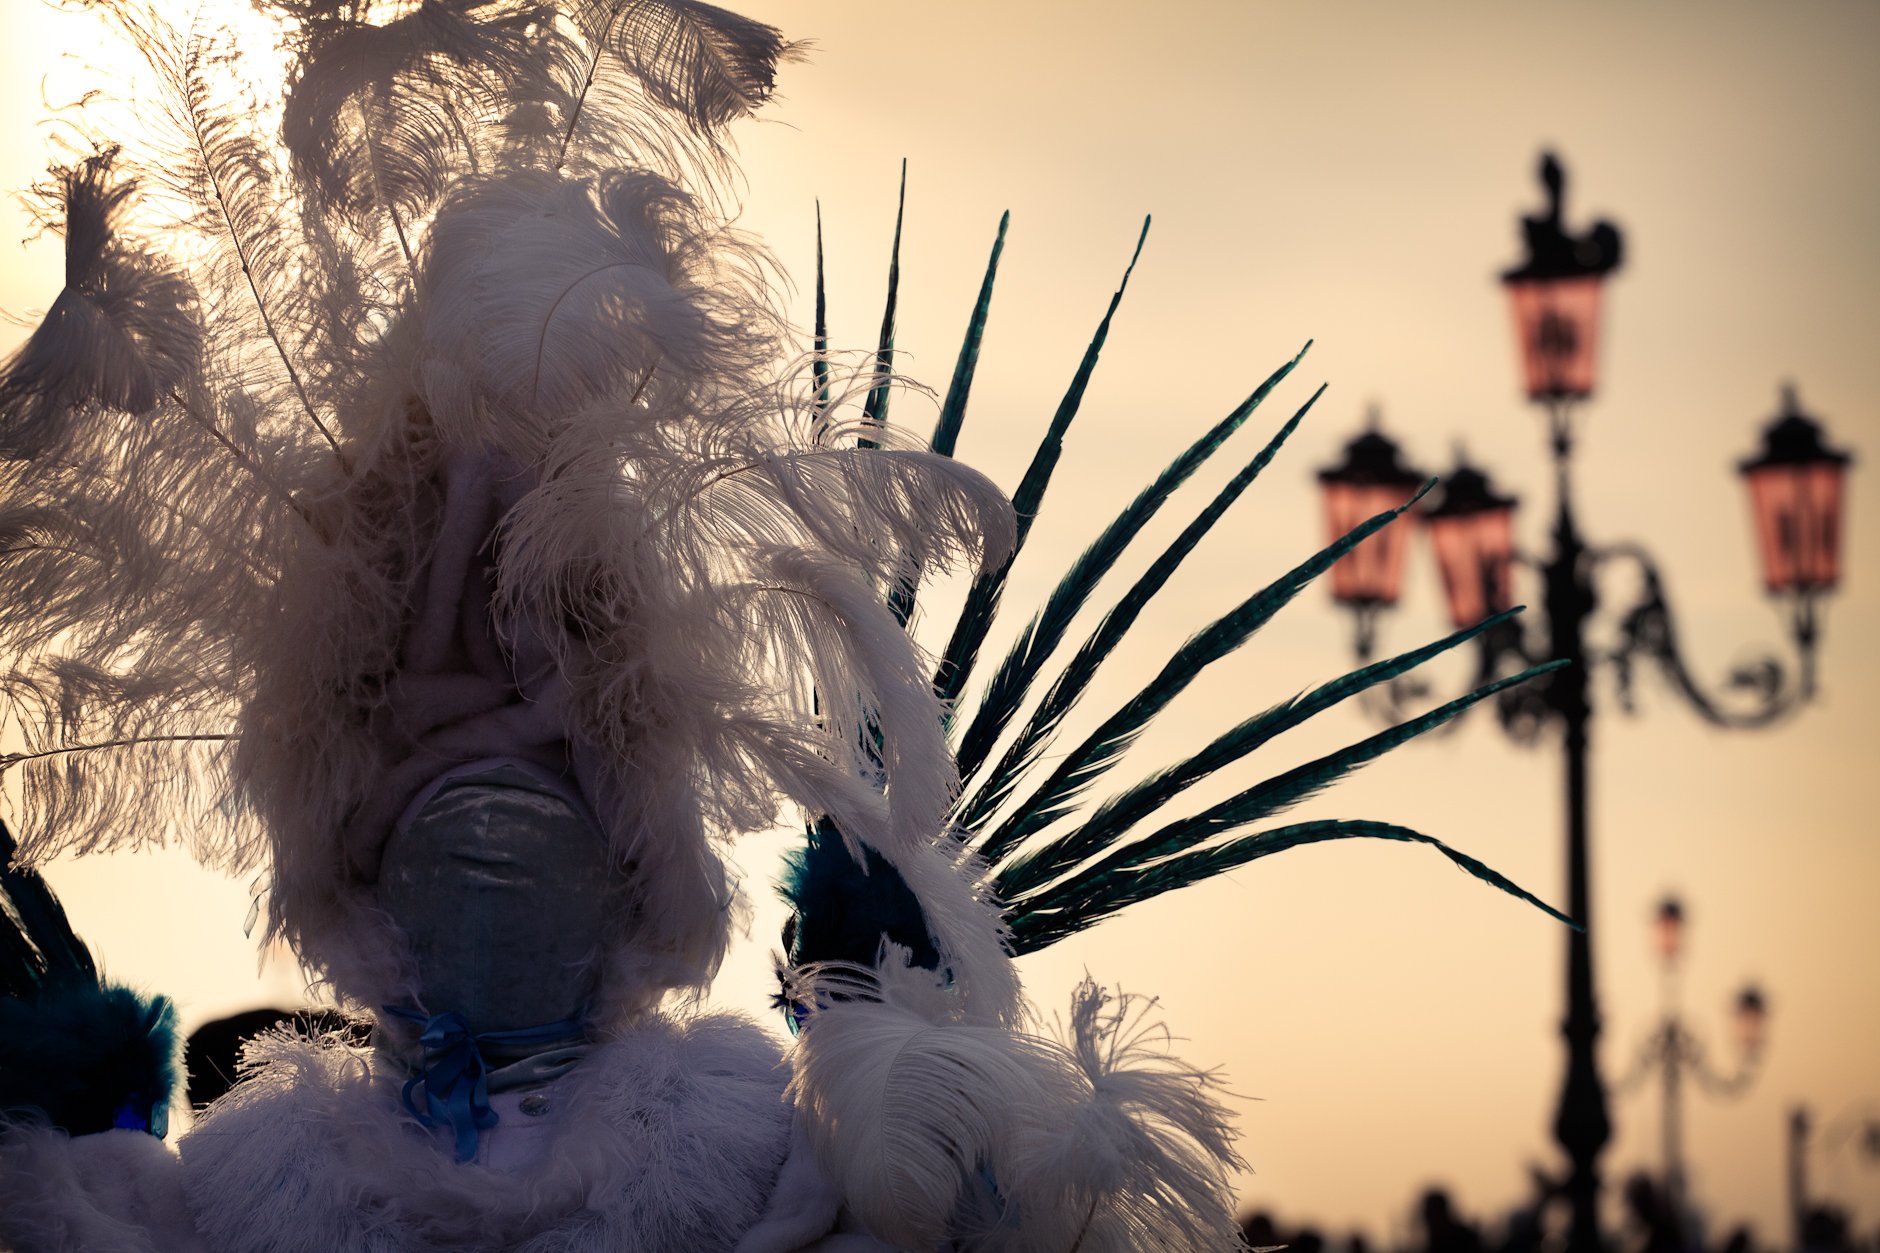 Photograph of a carnival costume in Venice from behind against the sun